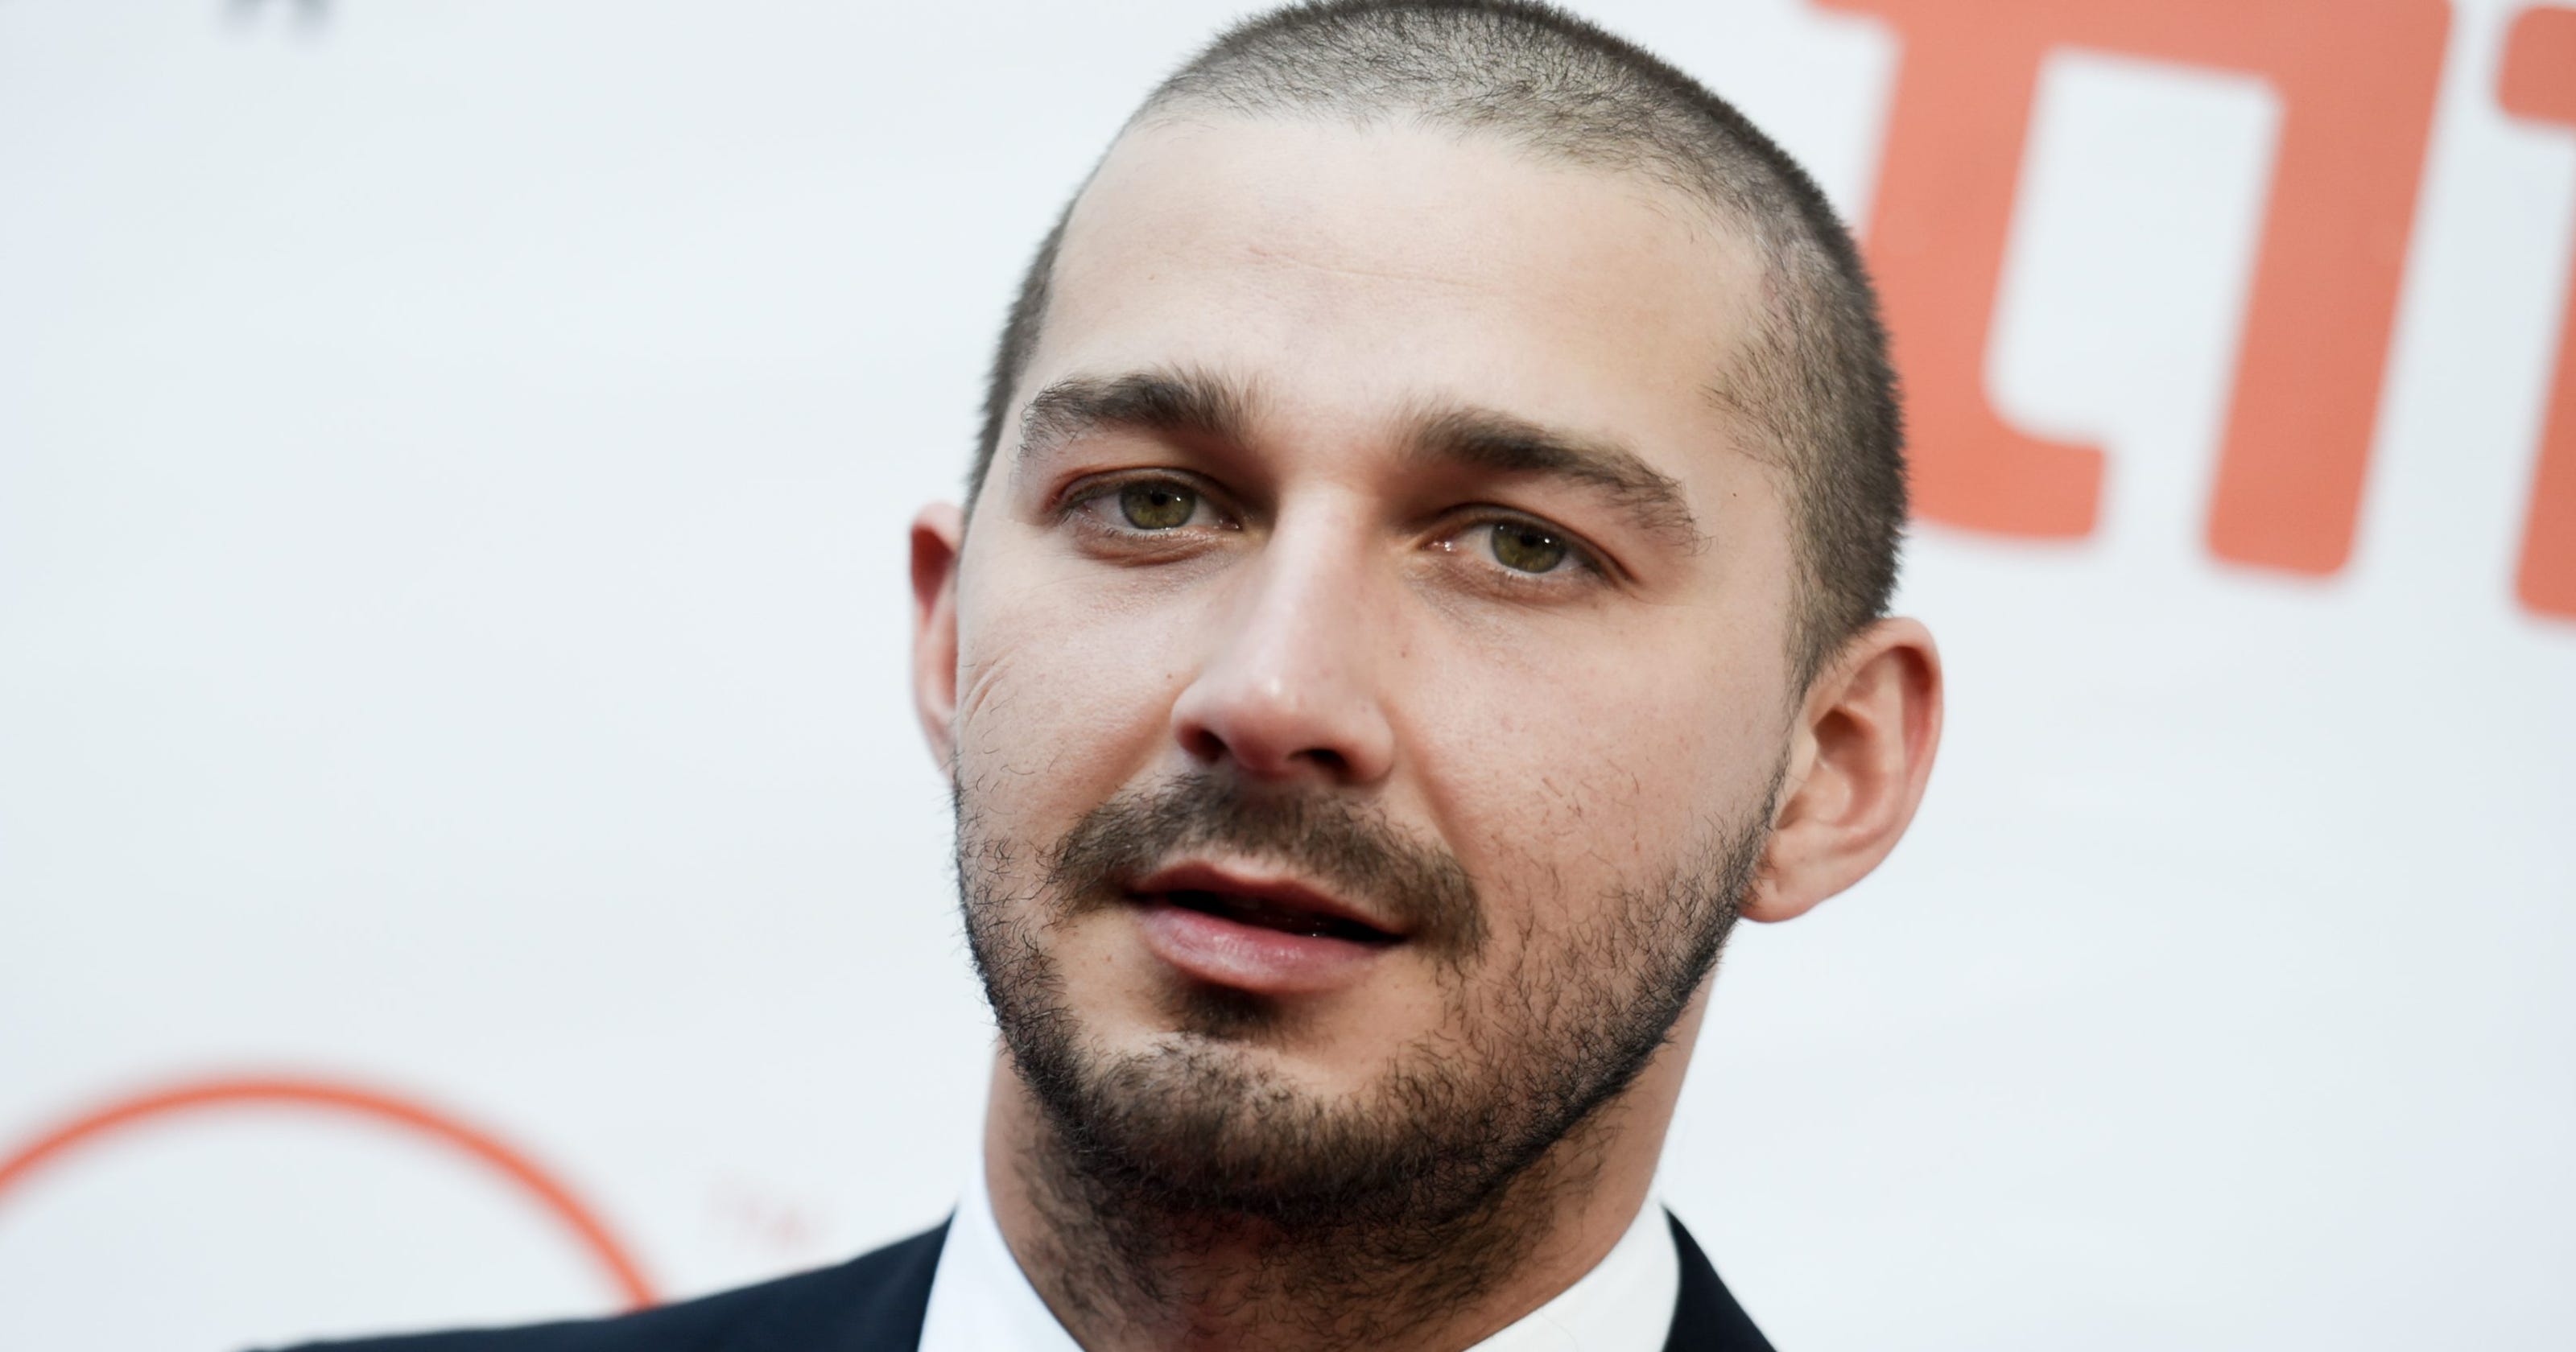 Shia LaBeouf and Mia Goth file for divorce, FKA Twigs enters picture3200 x 1680